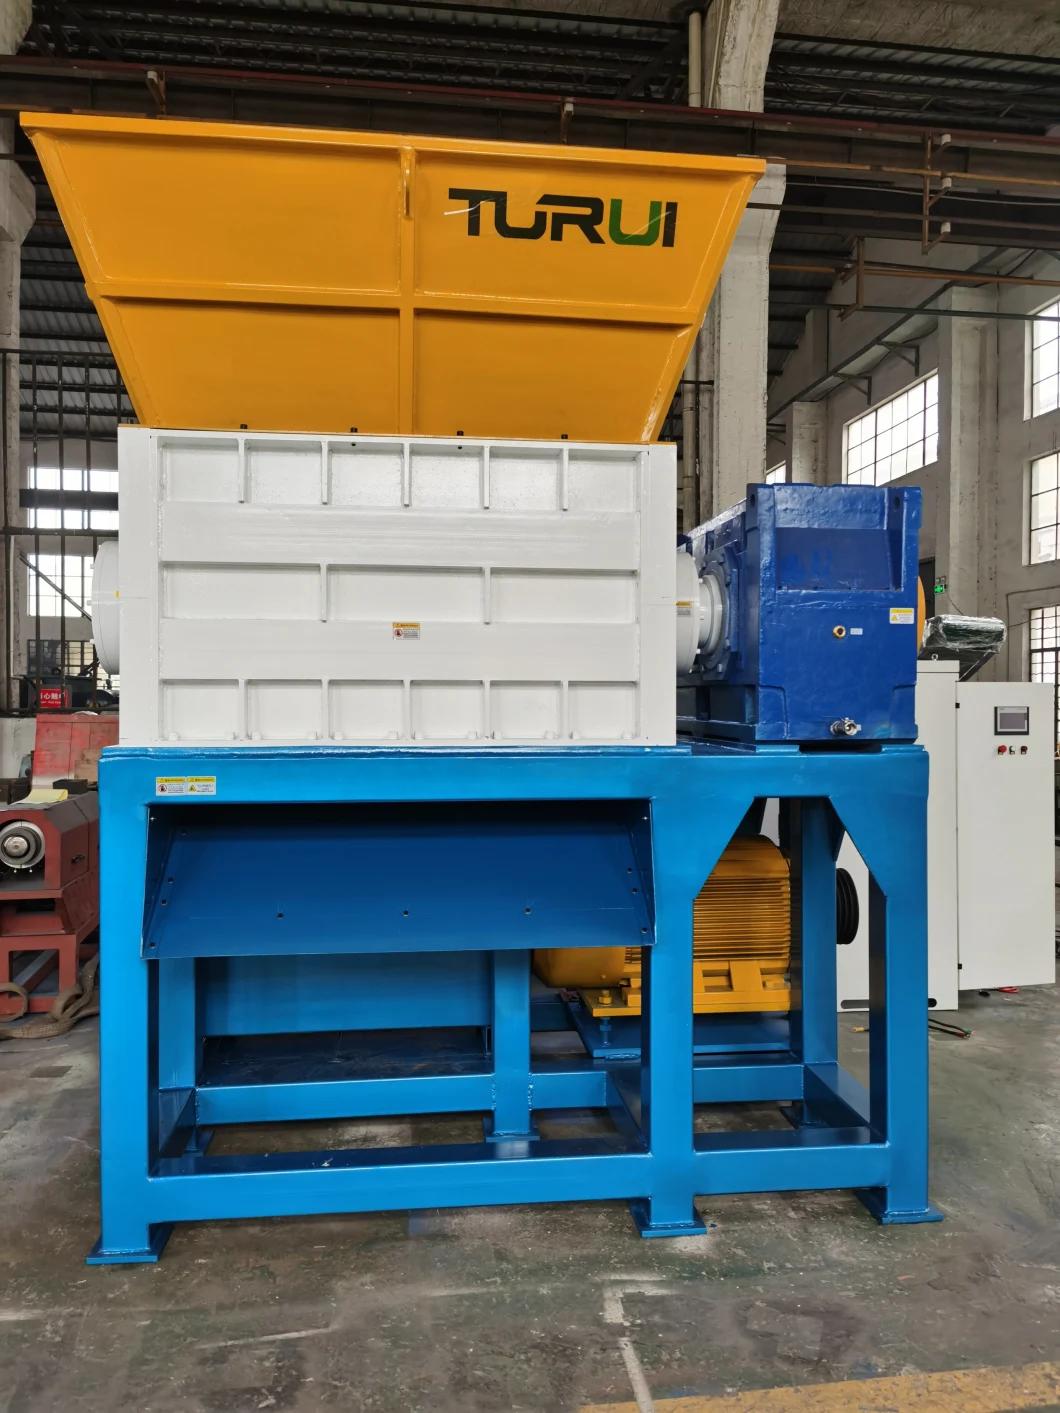 Wholesale High Quality Plastic Recycling Crushing Machine with Single Shaft/Double Shaft Shredder Machine/Recycling Machine Line/Plastic Recycling Machine